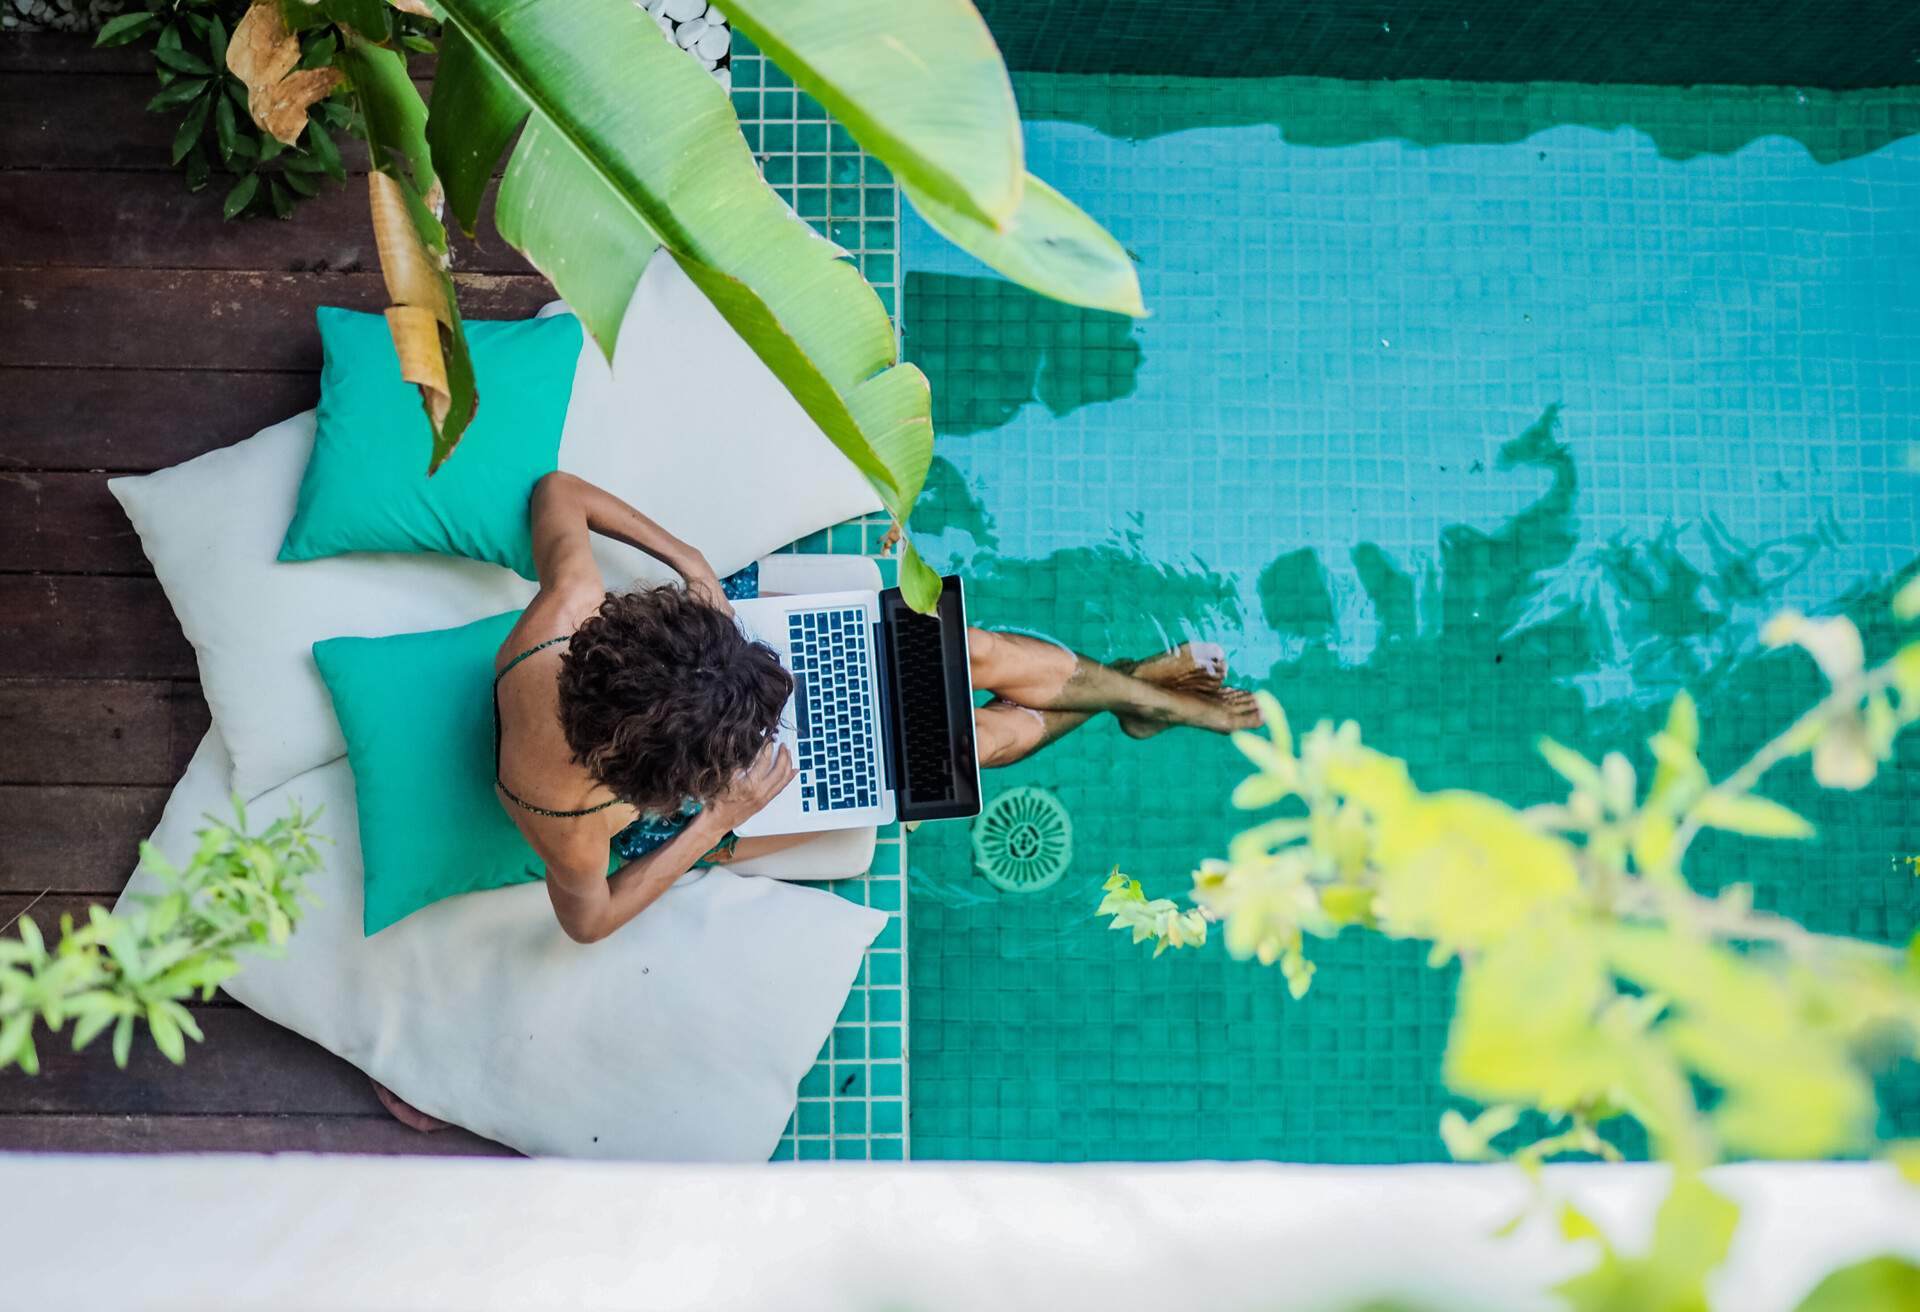 THEME_WOMAN_PERSON_DIGITAL-NOMAD_WORKING_REMOTELY_POOL_DEVICE_LAPTOP_shutterstock_1742840084